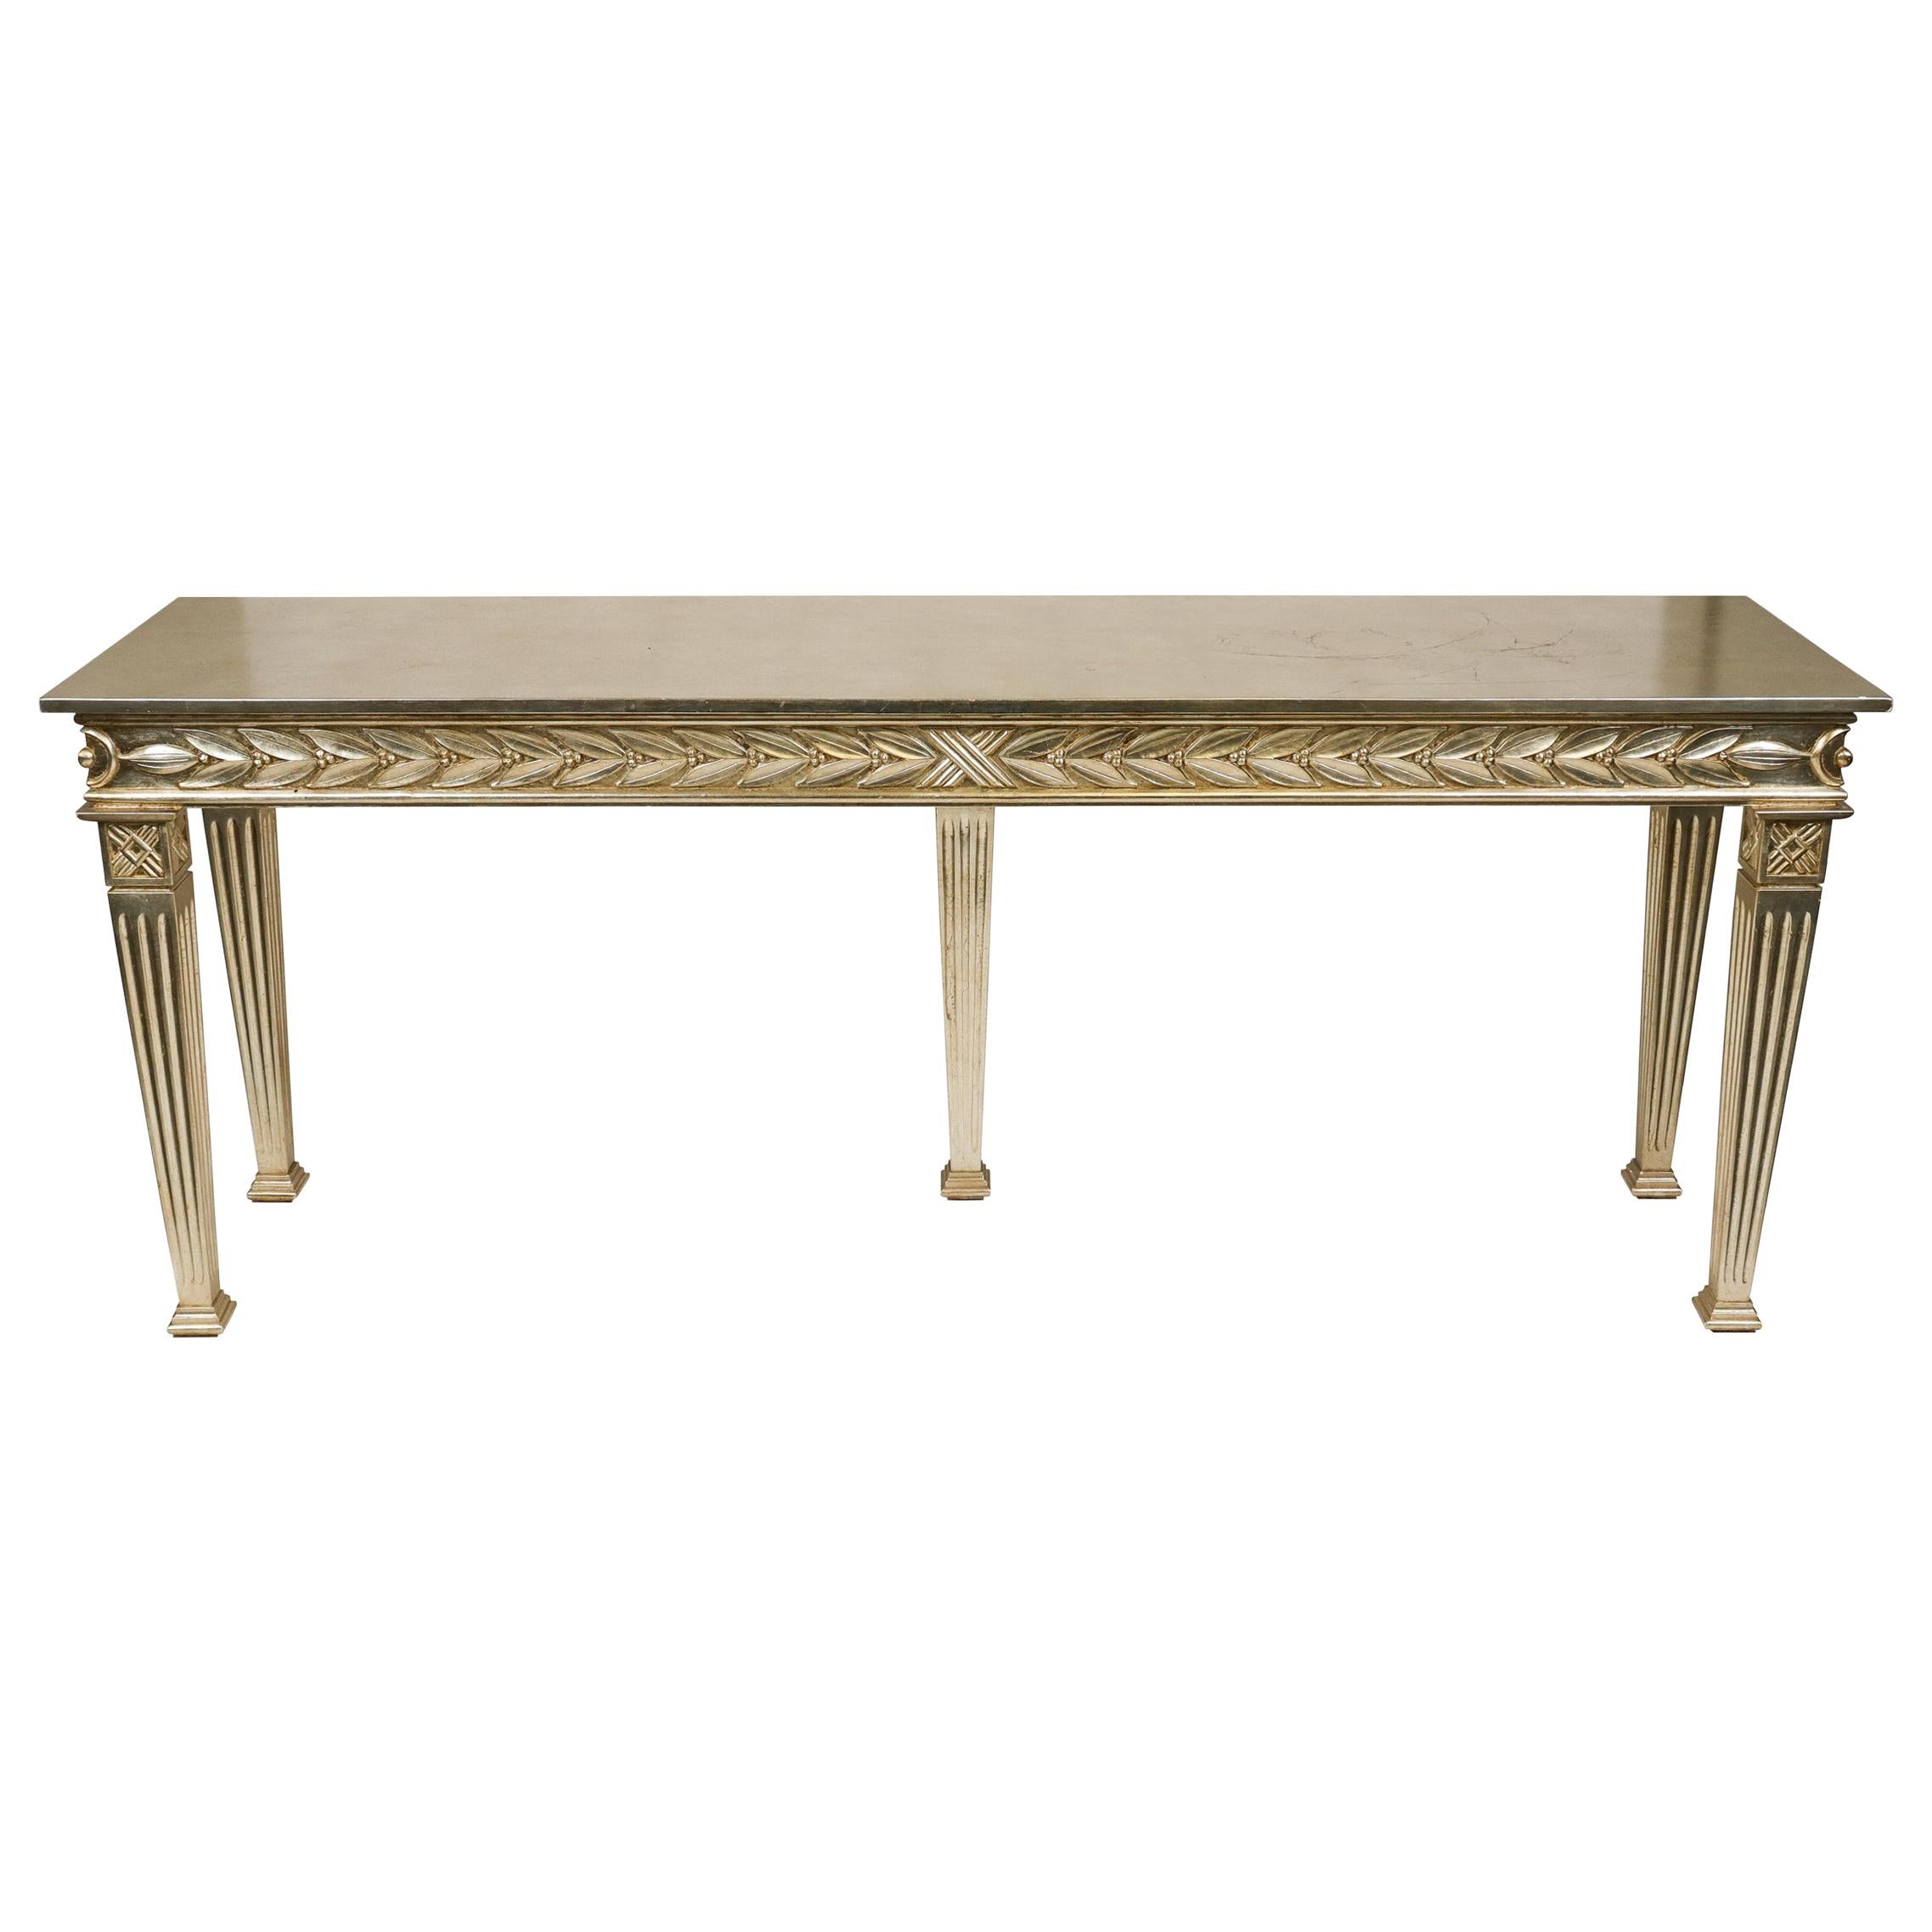 Italian Neoclassical Manner Silver-Gilt Console Table